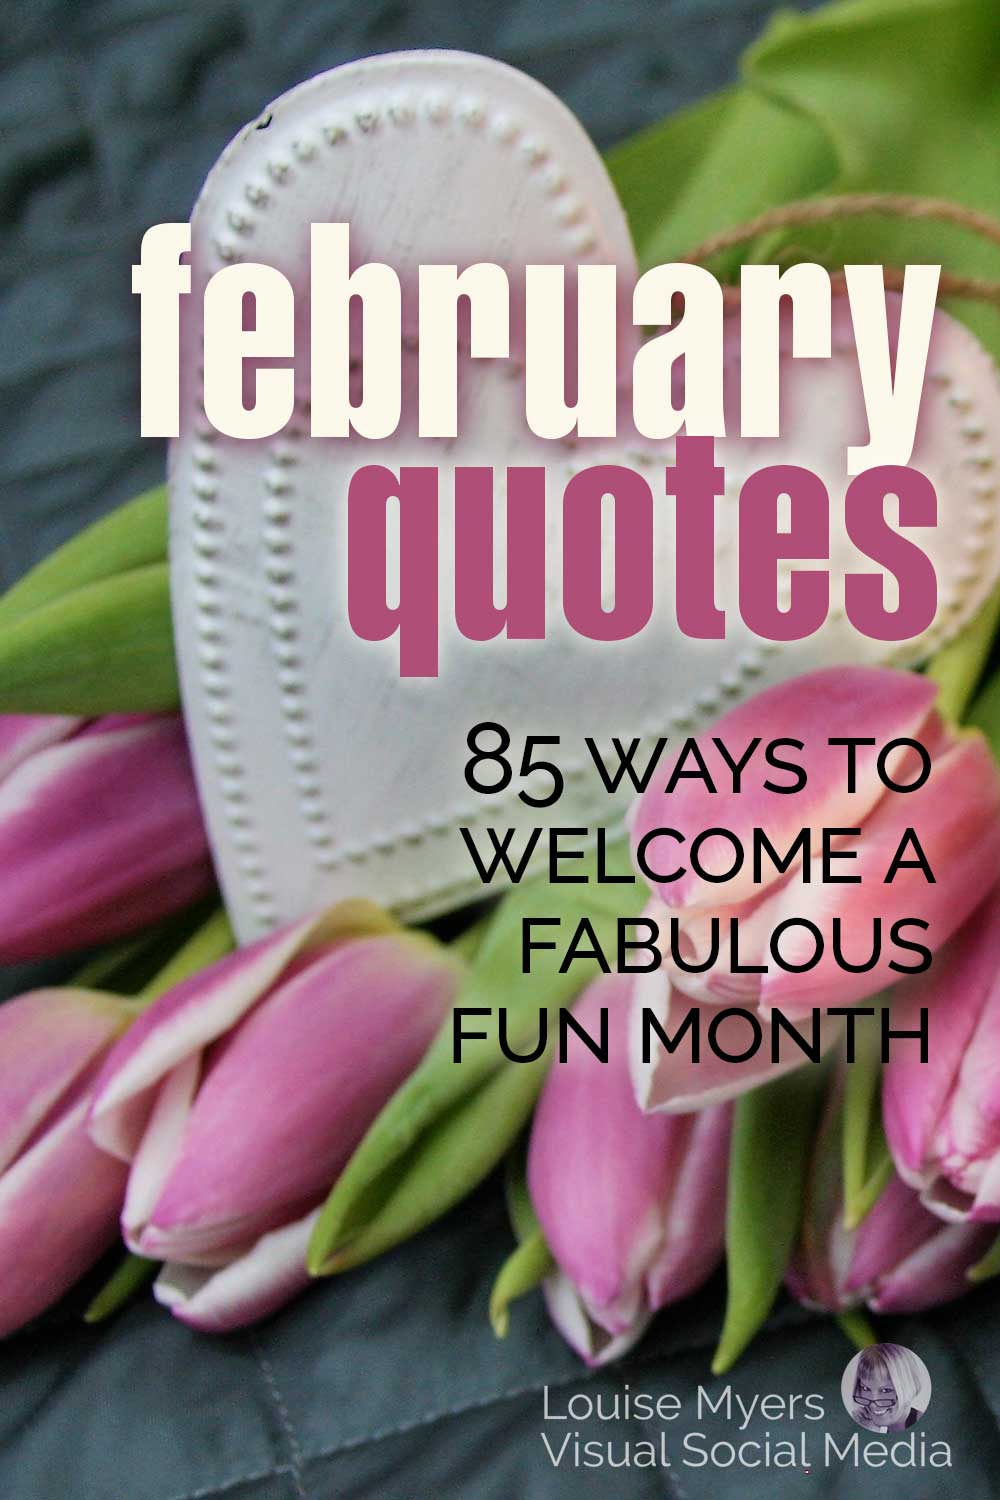 white heart ornament on pink tulips says february quotes, 85 ways to welcome a fun fabulous month.